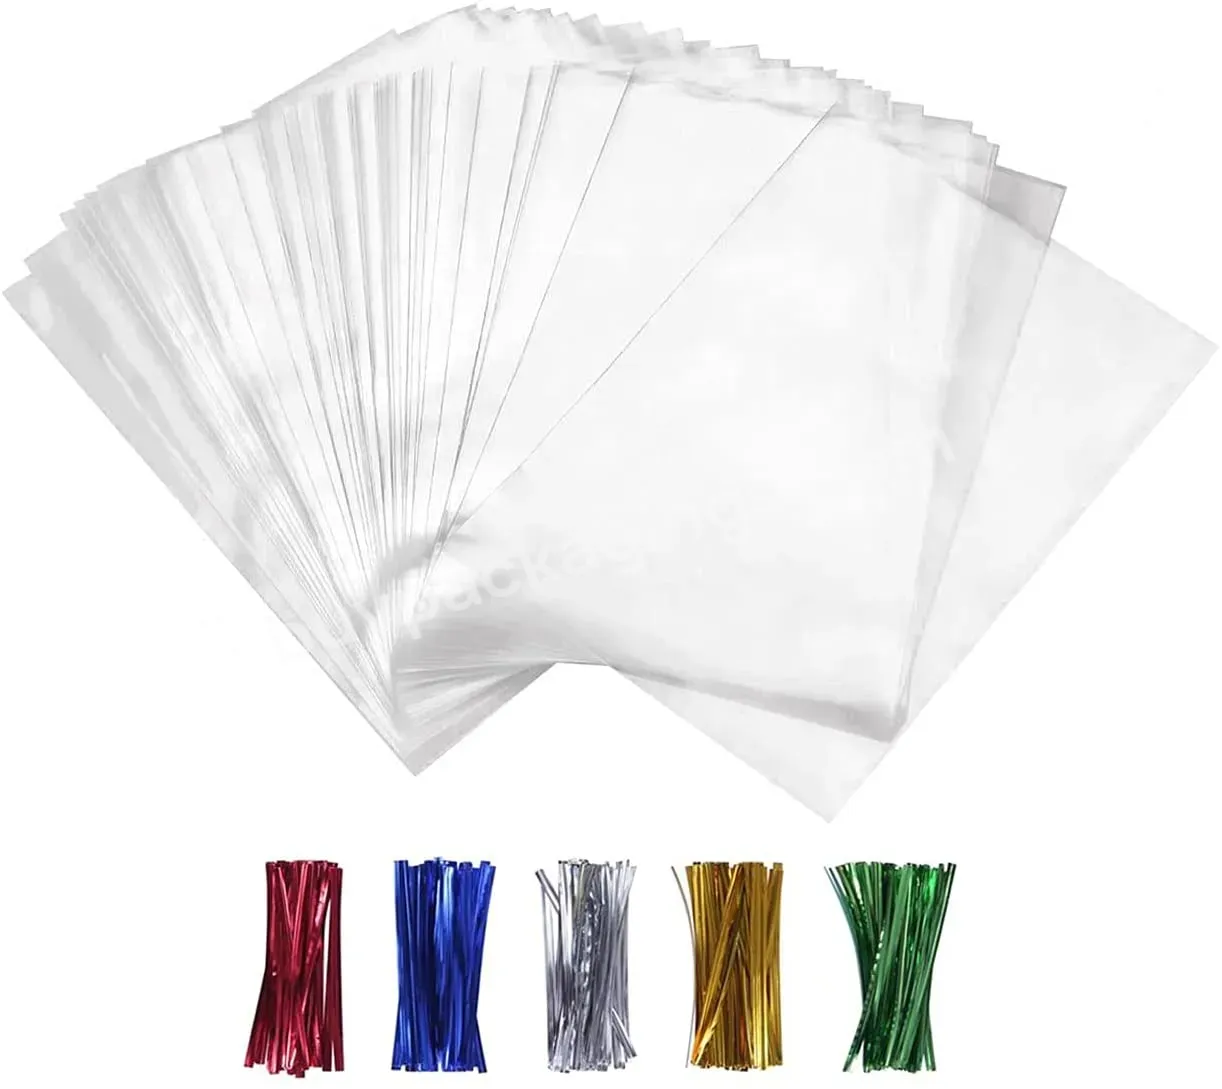 20x31 Cello Treat Flat Bag With Twist Ties Bopp Cellophane Bags Transparent Clear For Bread Candy Chocolate Gift Cellophane Bags - Buy Cellophane Bags,Clear Plastic Bags,Gift Bag.